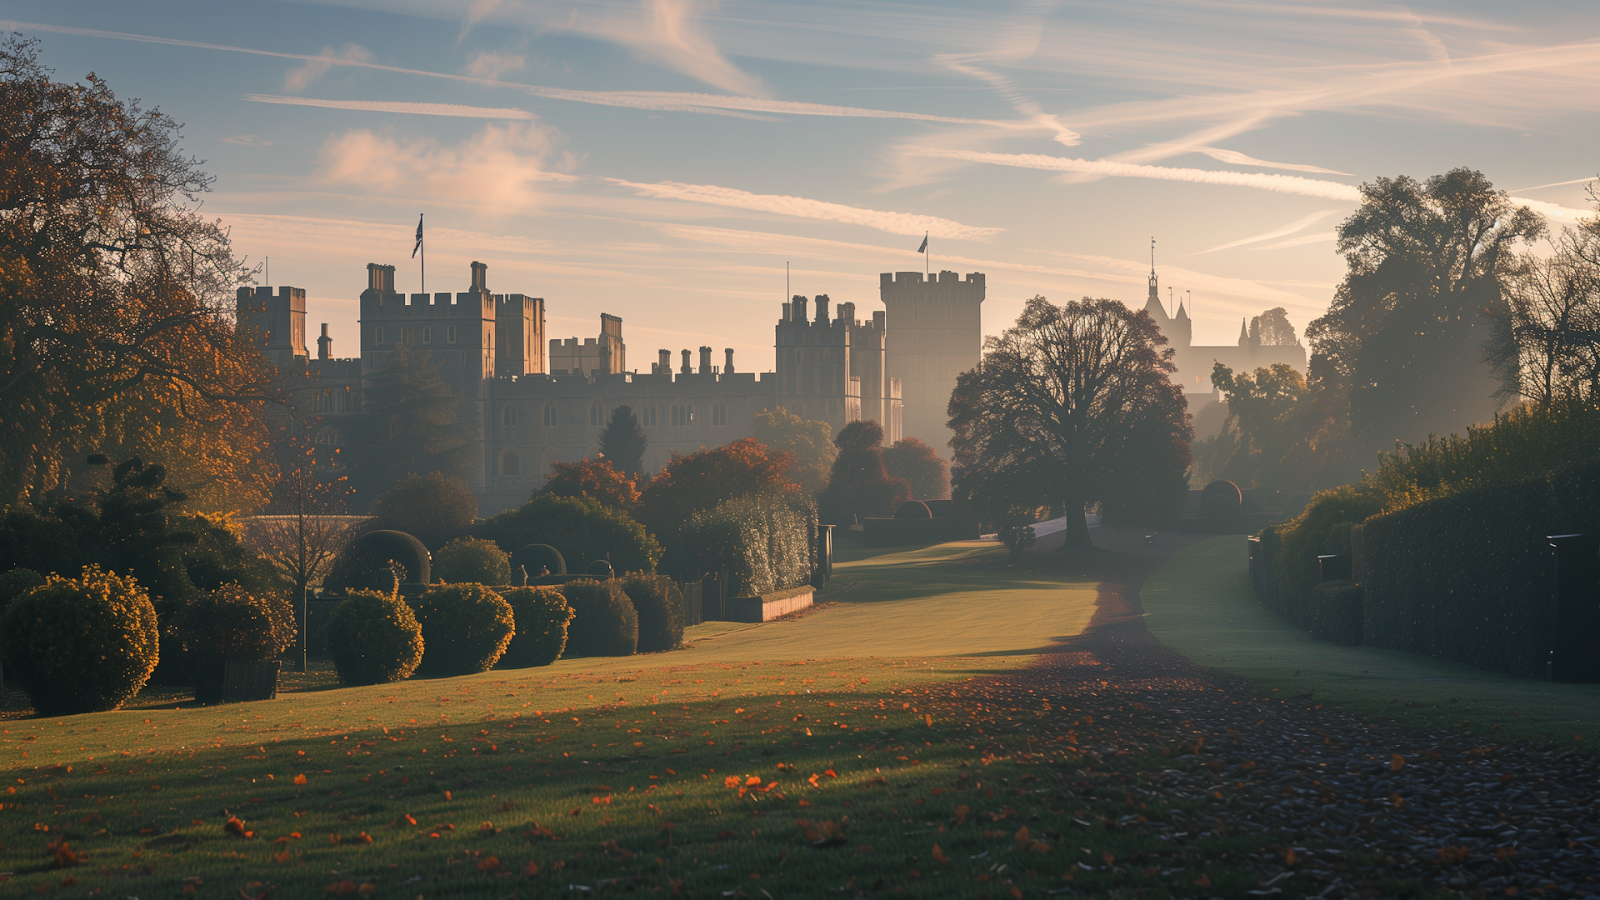 Early morning serenity at Windsor Castle, showcasing its detailed façade and gardens in soft sunlight.